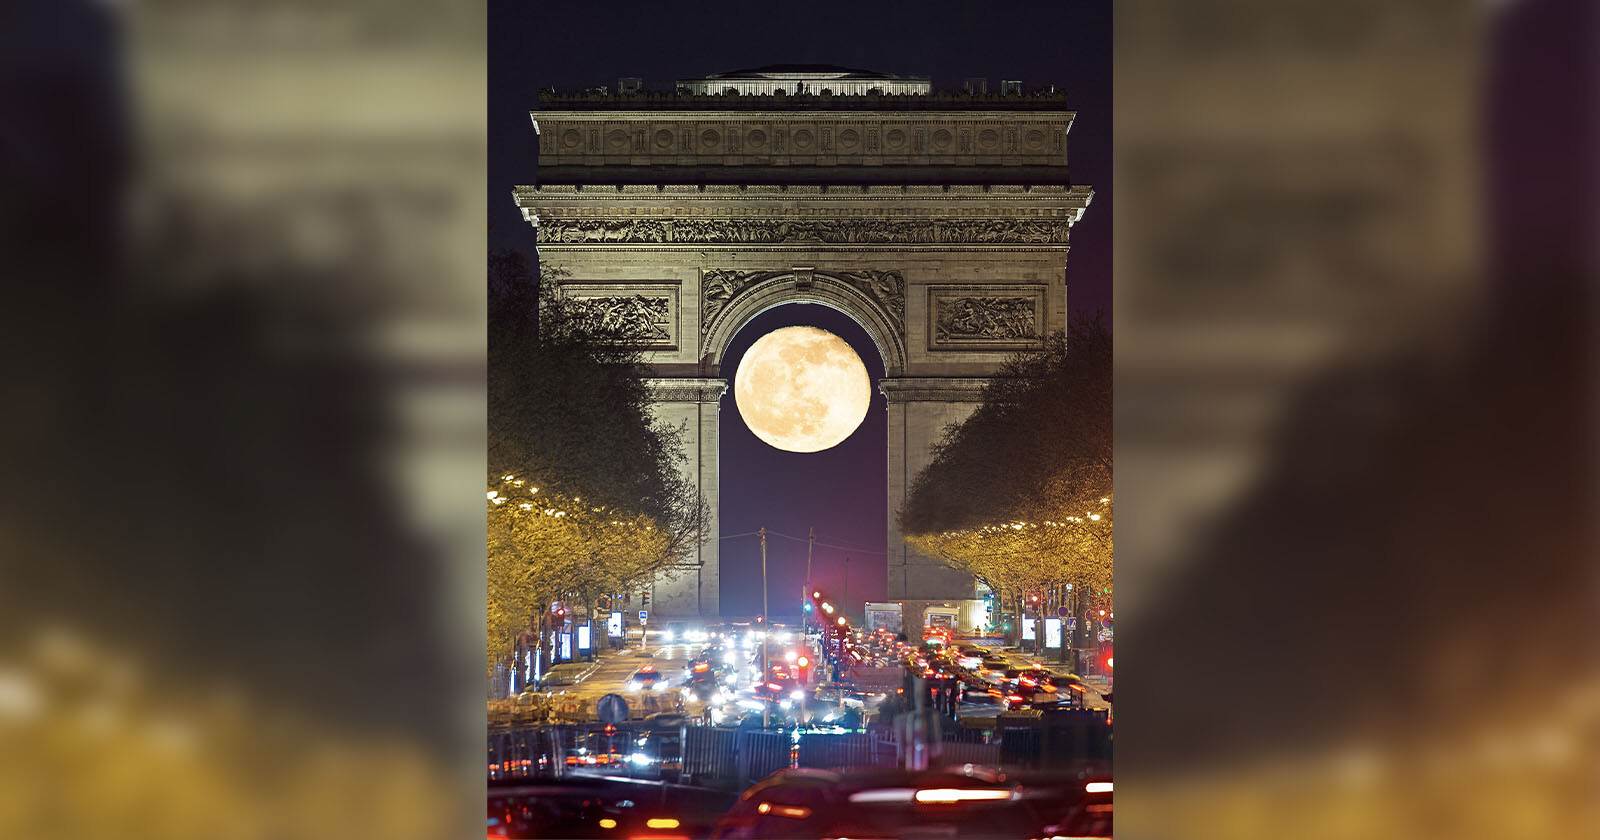 Months of Planning Pays Off as Photographer Captures Full Moon Inside Arc de Triomphe